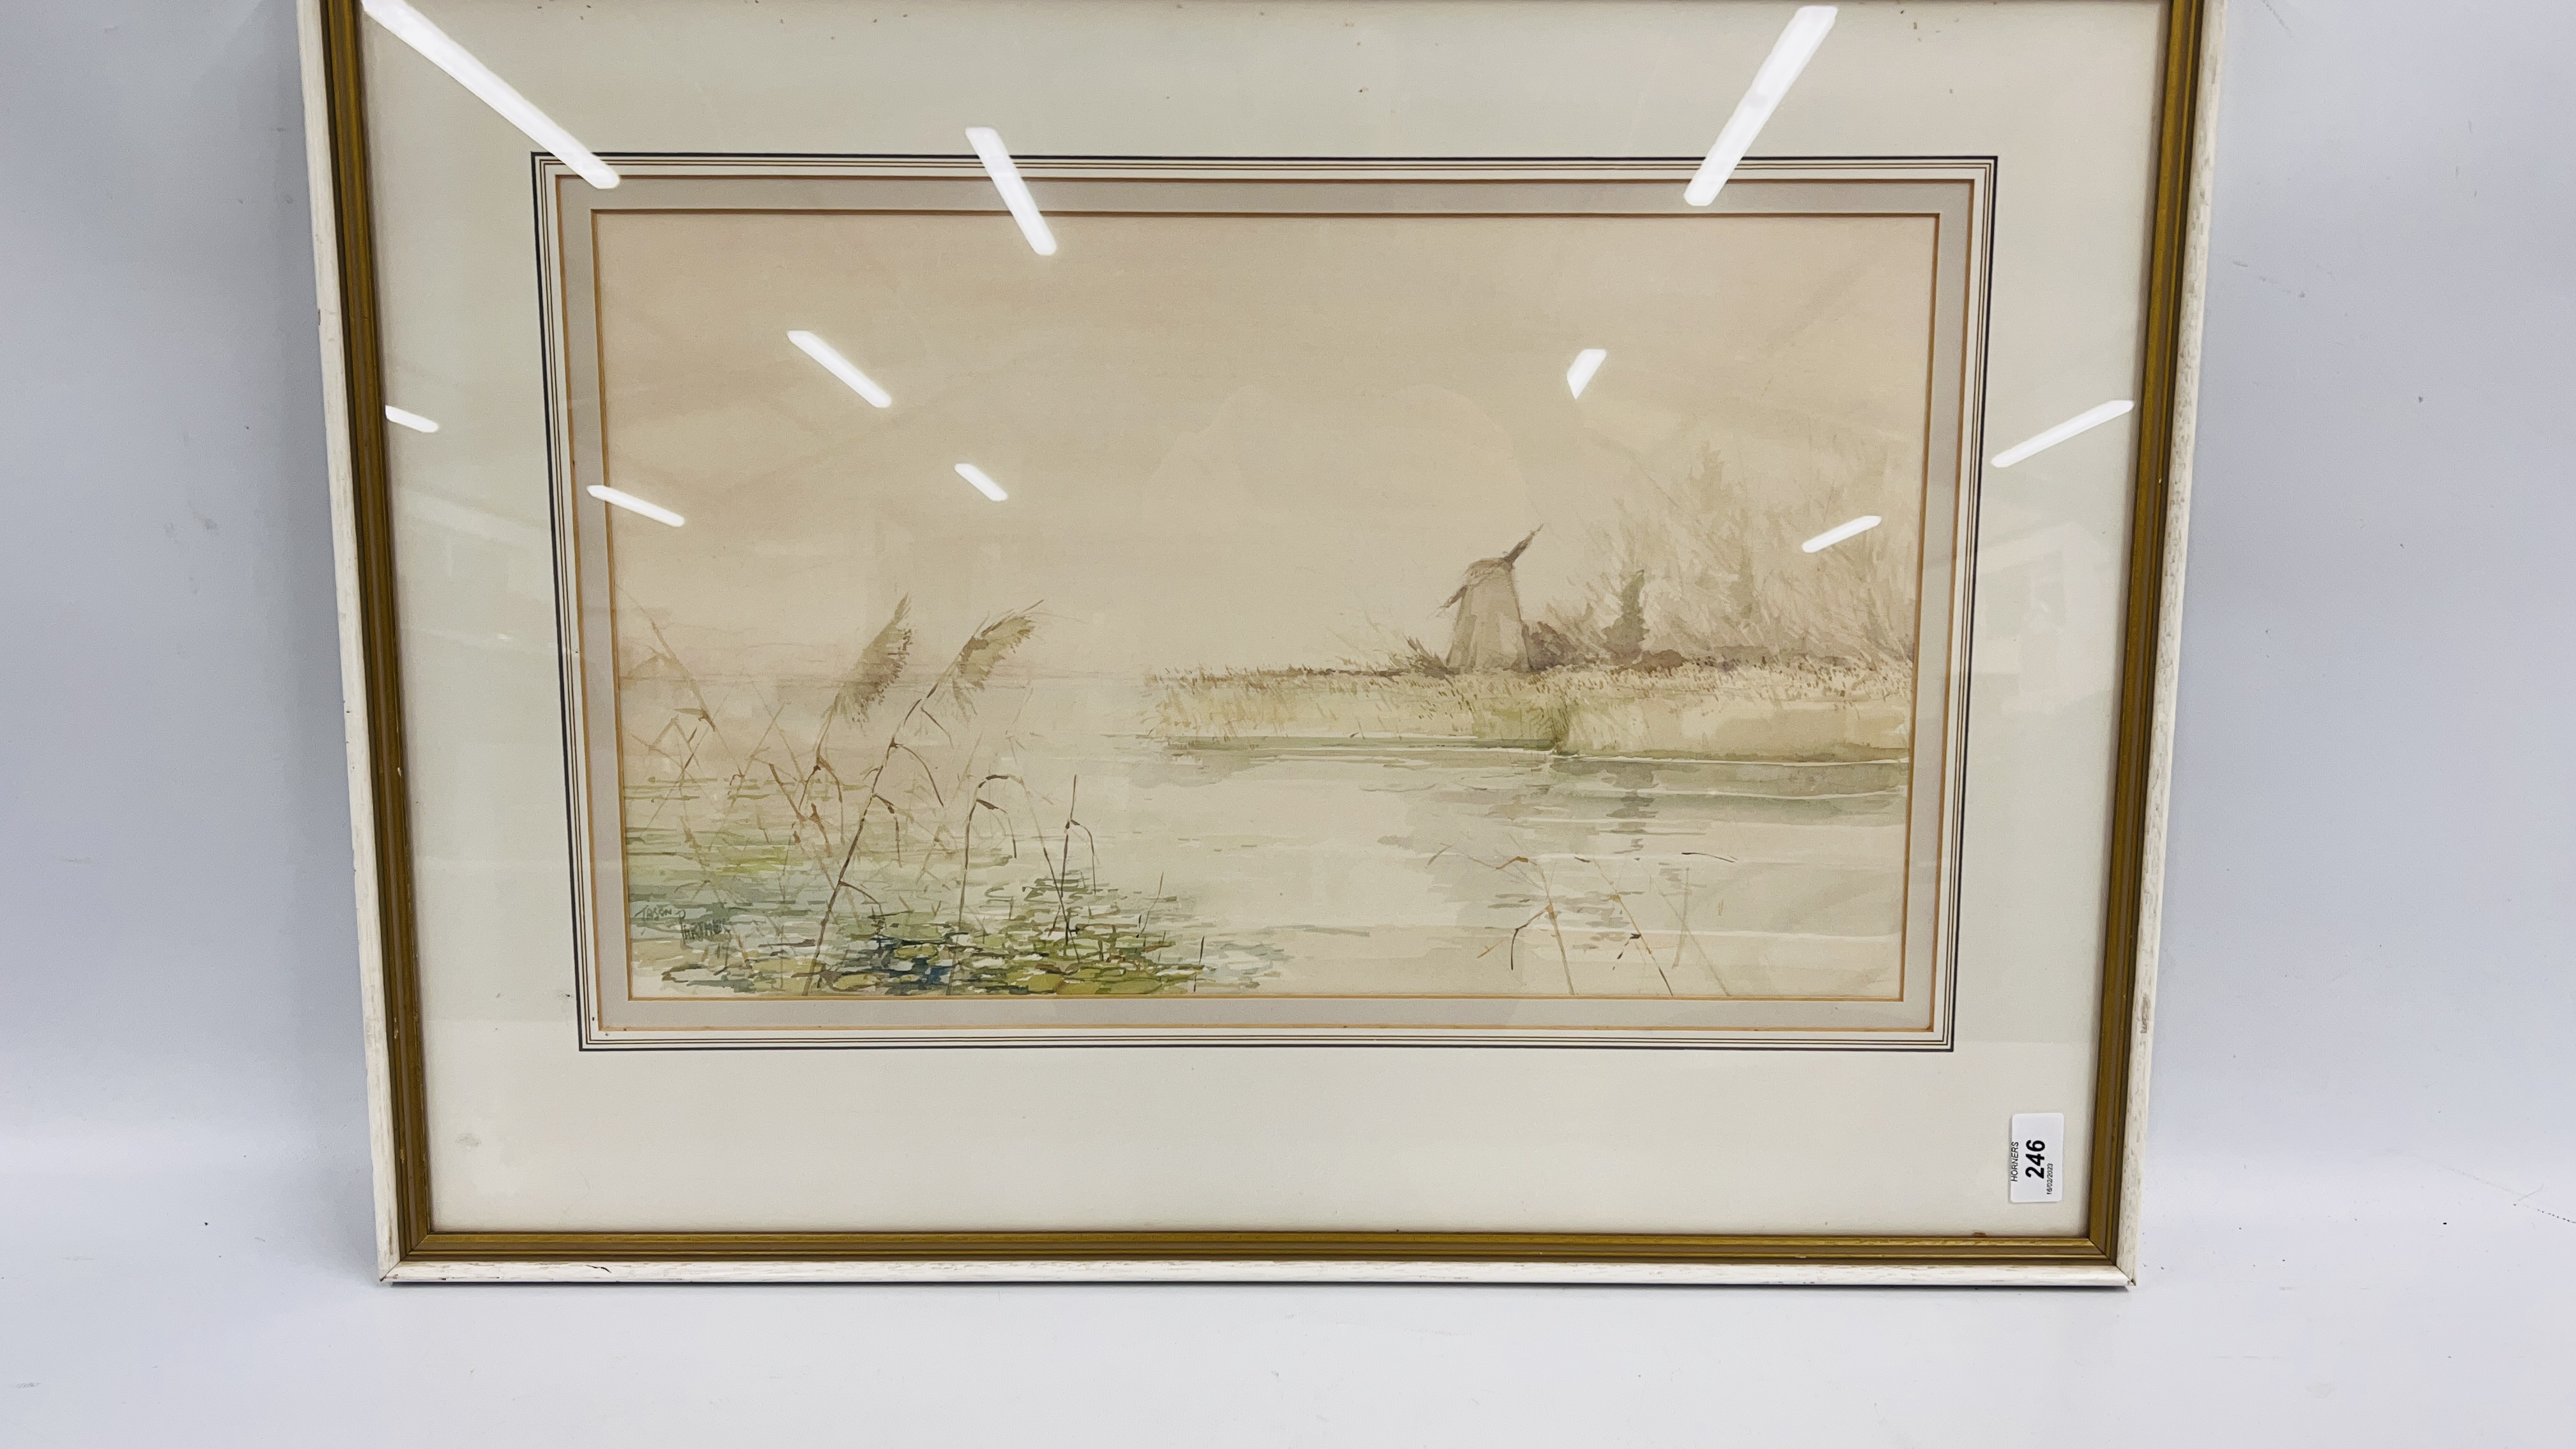 FRAMED AND GLAZED WATERCOLOUR BY 'JASON PARTNER' TITLED 'MISTY MORNING ON THE BROAD' 21" X 14".